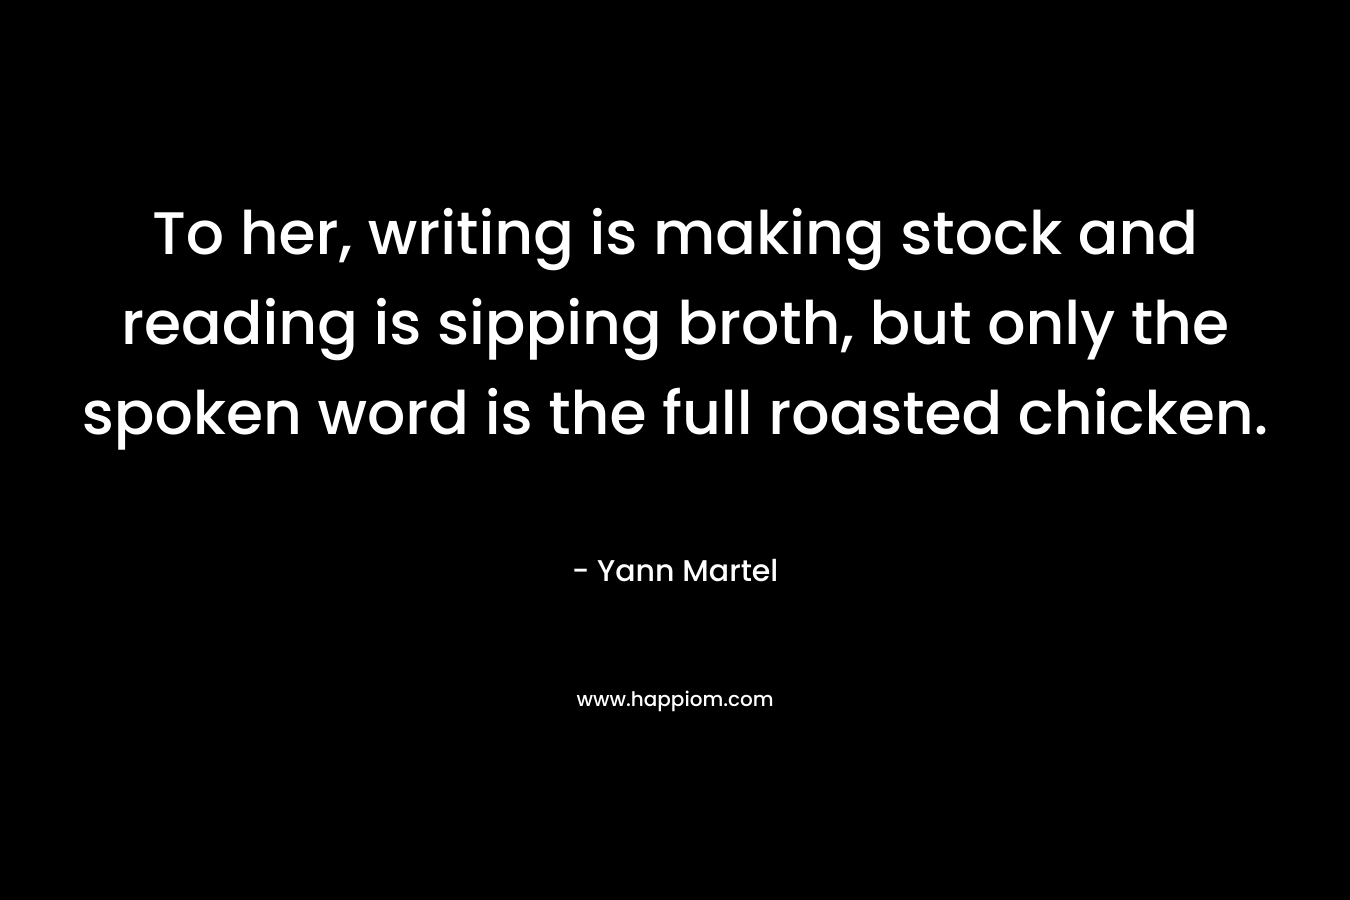 To her, writing is making stock and reading is sipping broth, but only the spoken word is the full roasted chicken.